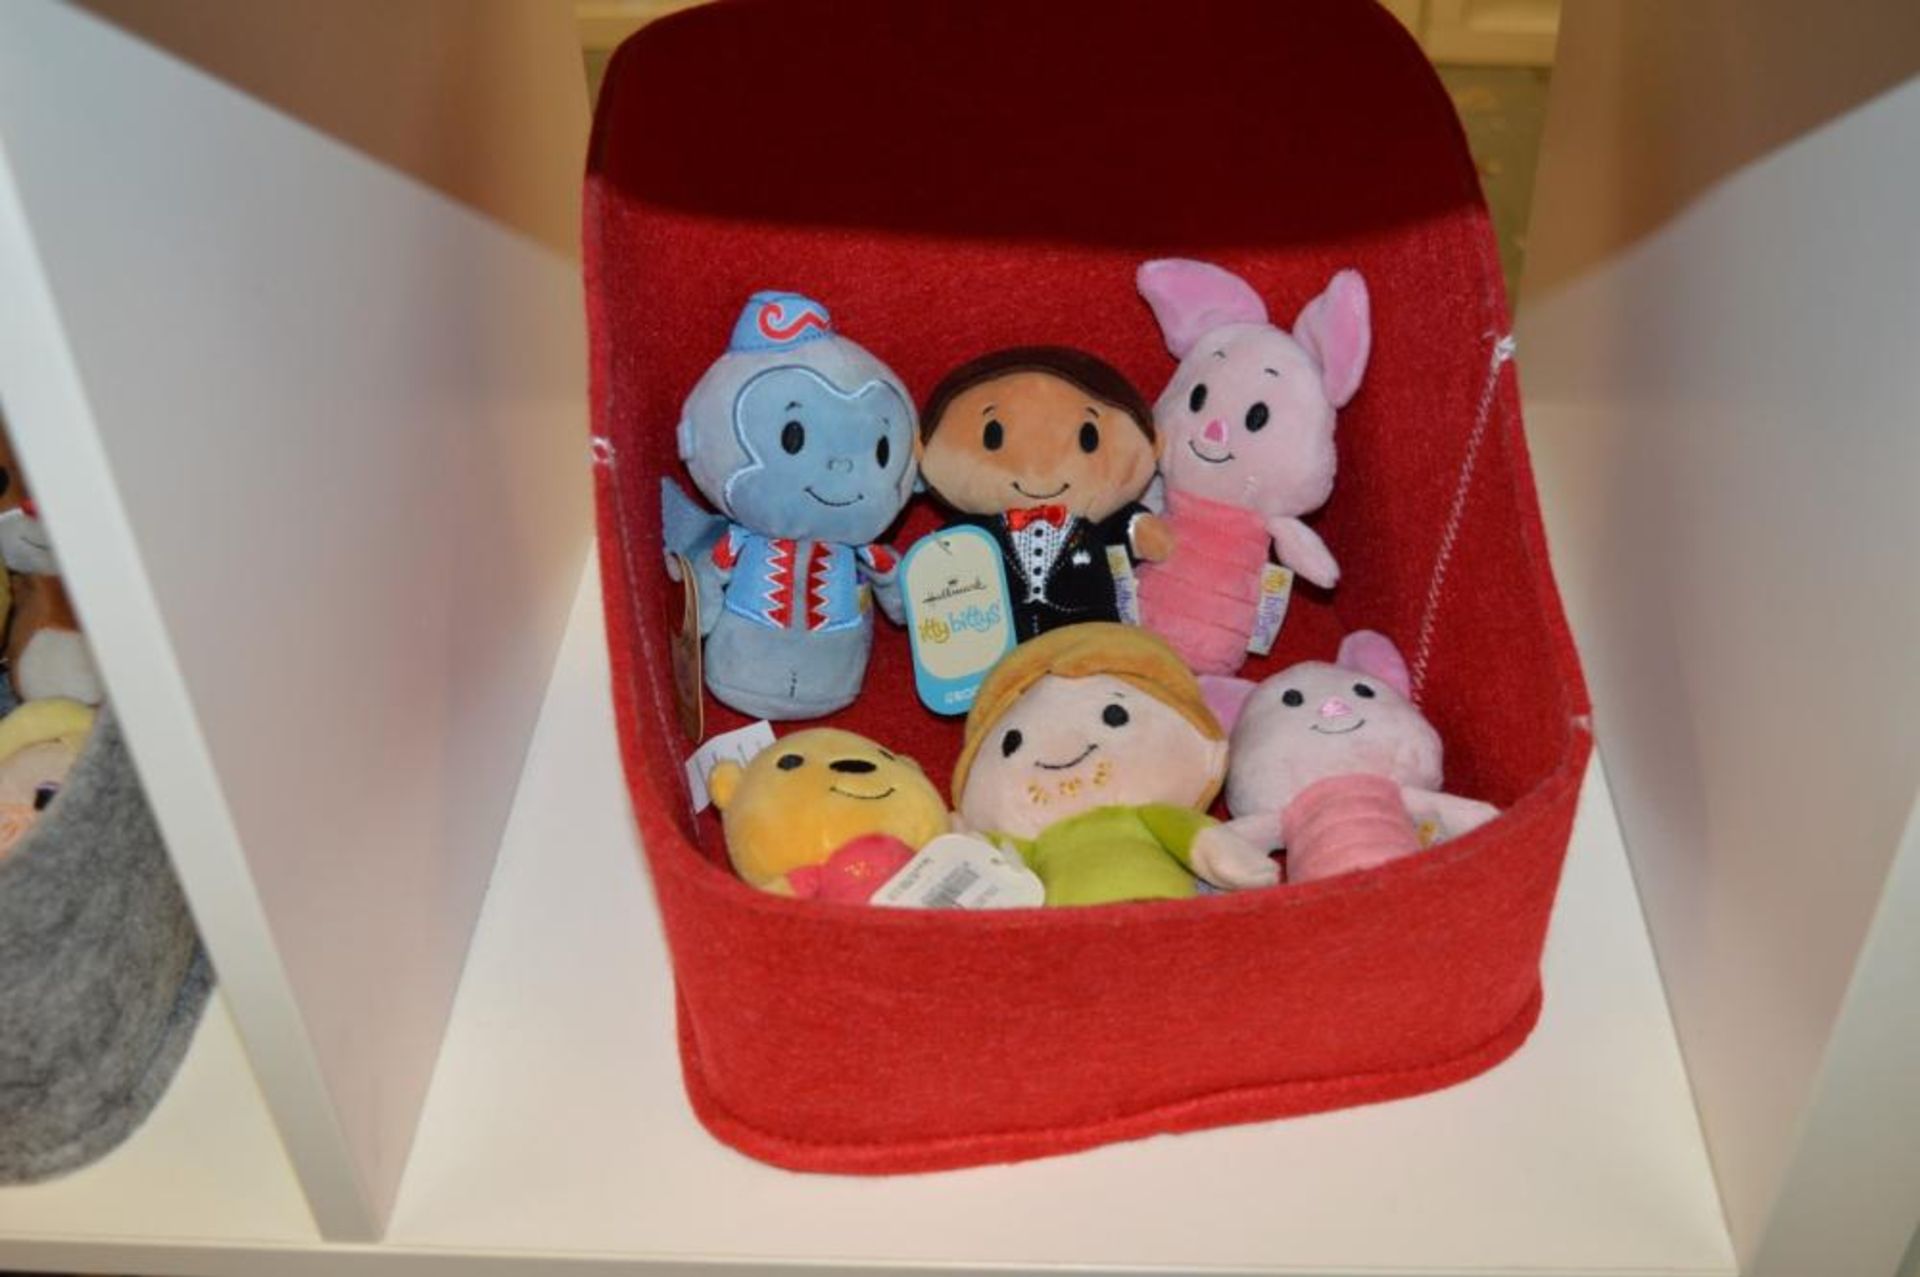 Approx 100 x Hallmark Itty Bittsy Character Soft Toys With 18 x Storage Baskets - Ref BB - CL351 - L - Image 7 of 19